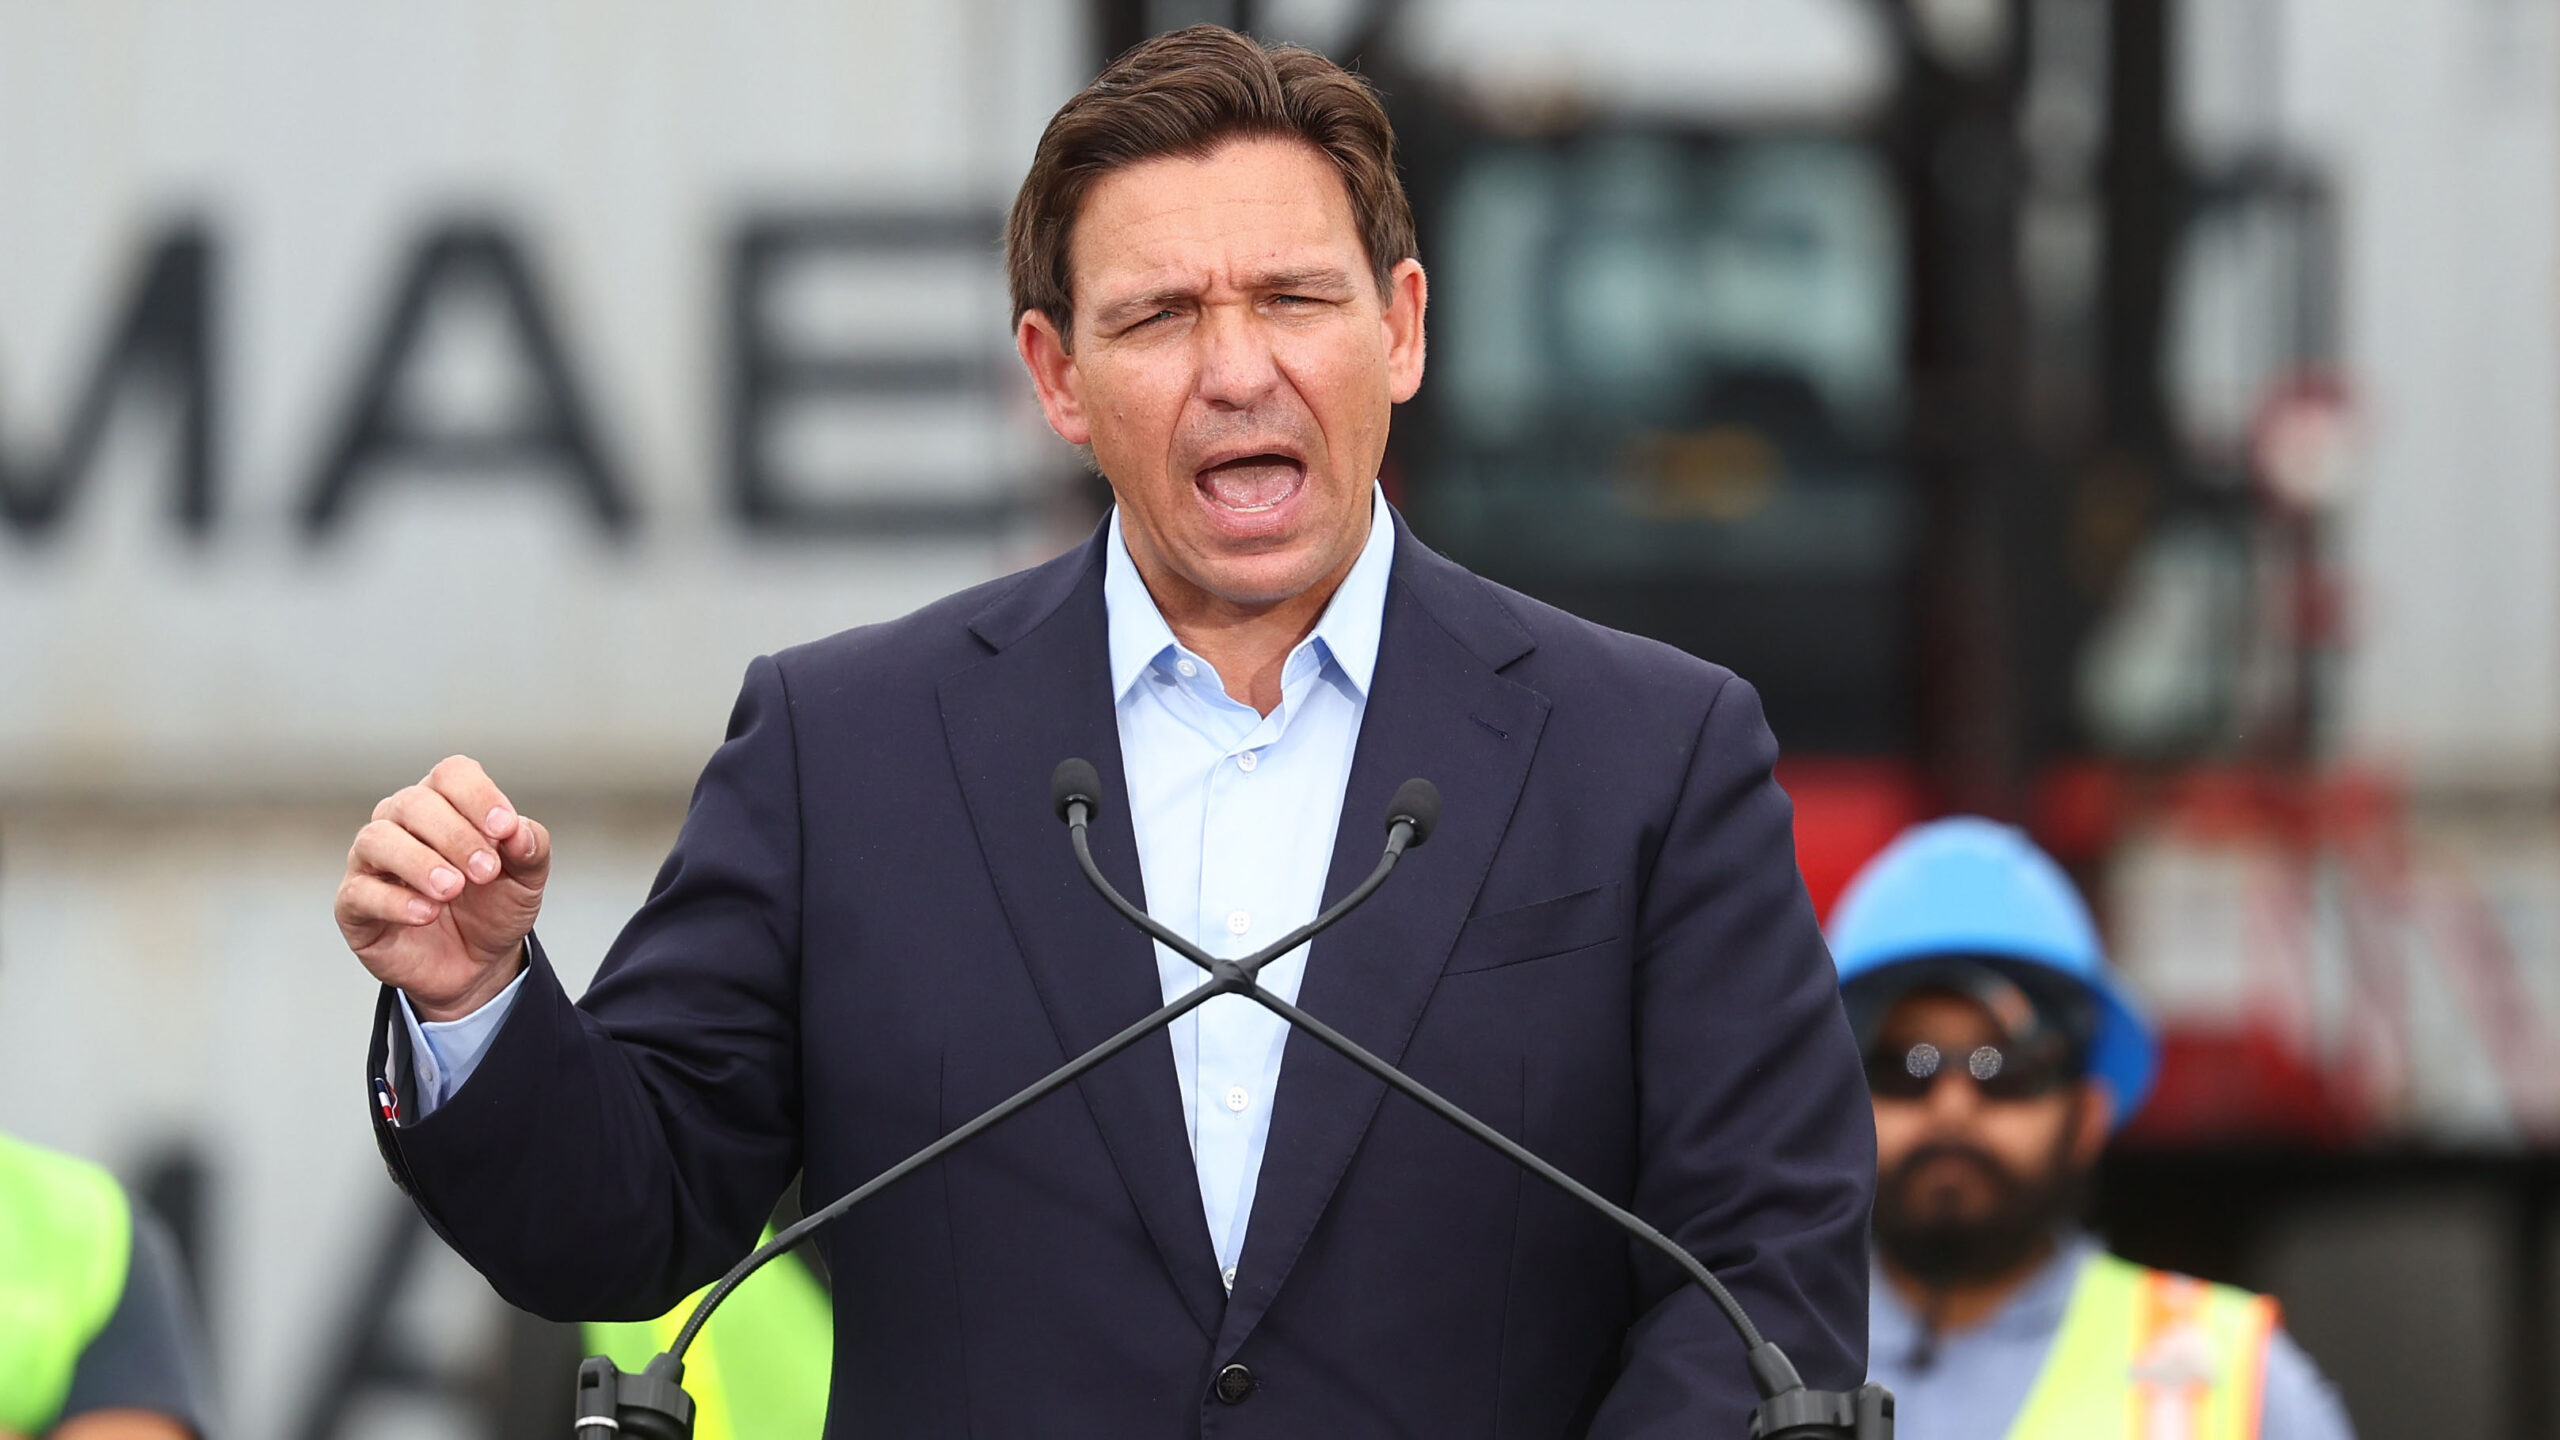 DeSantis orders Florida to aid Israel with rescue missions.